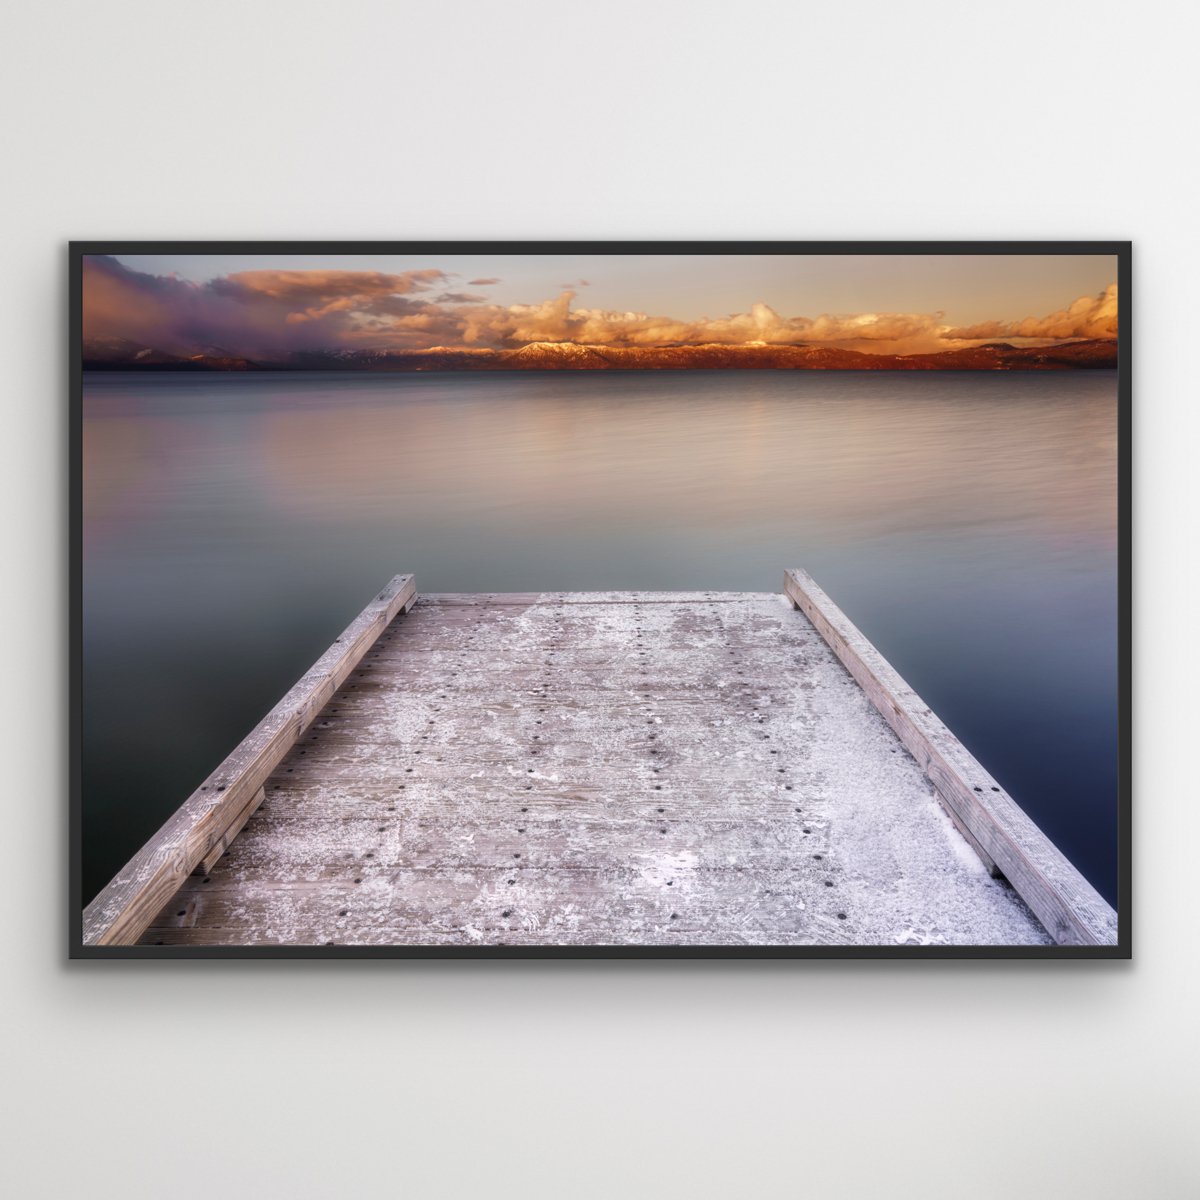 White Pier, Lake Tahoe - FRAMED - Limited Edition by Francesco Carucci